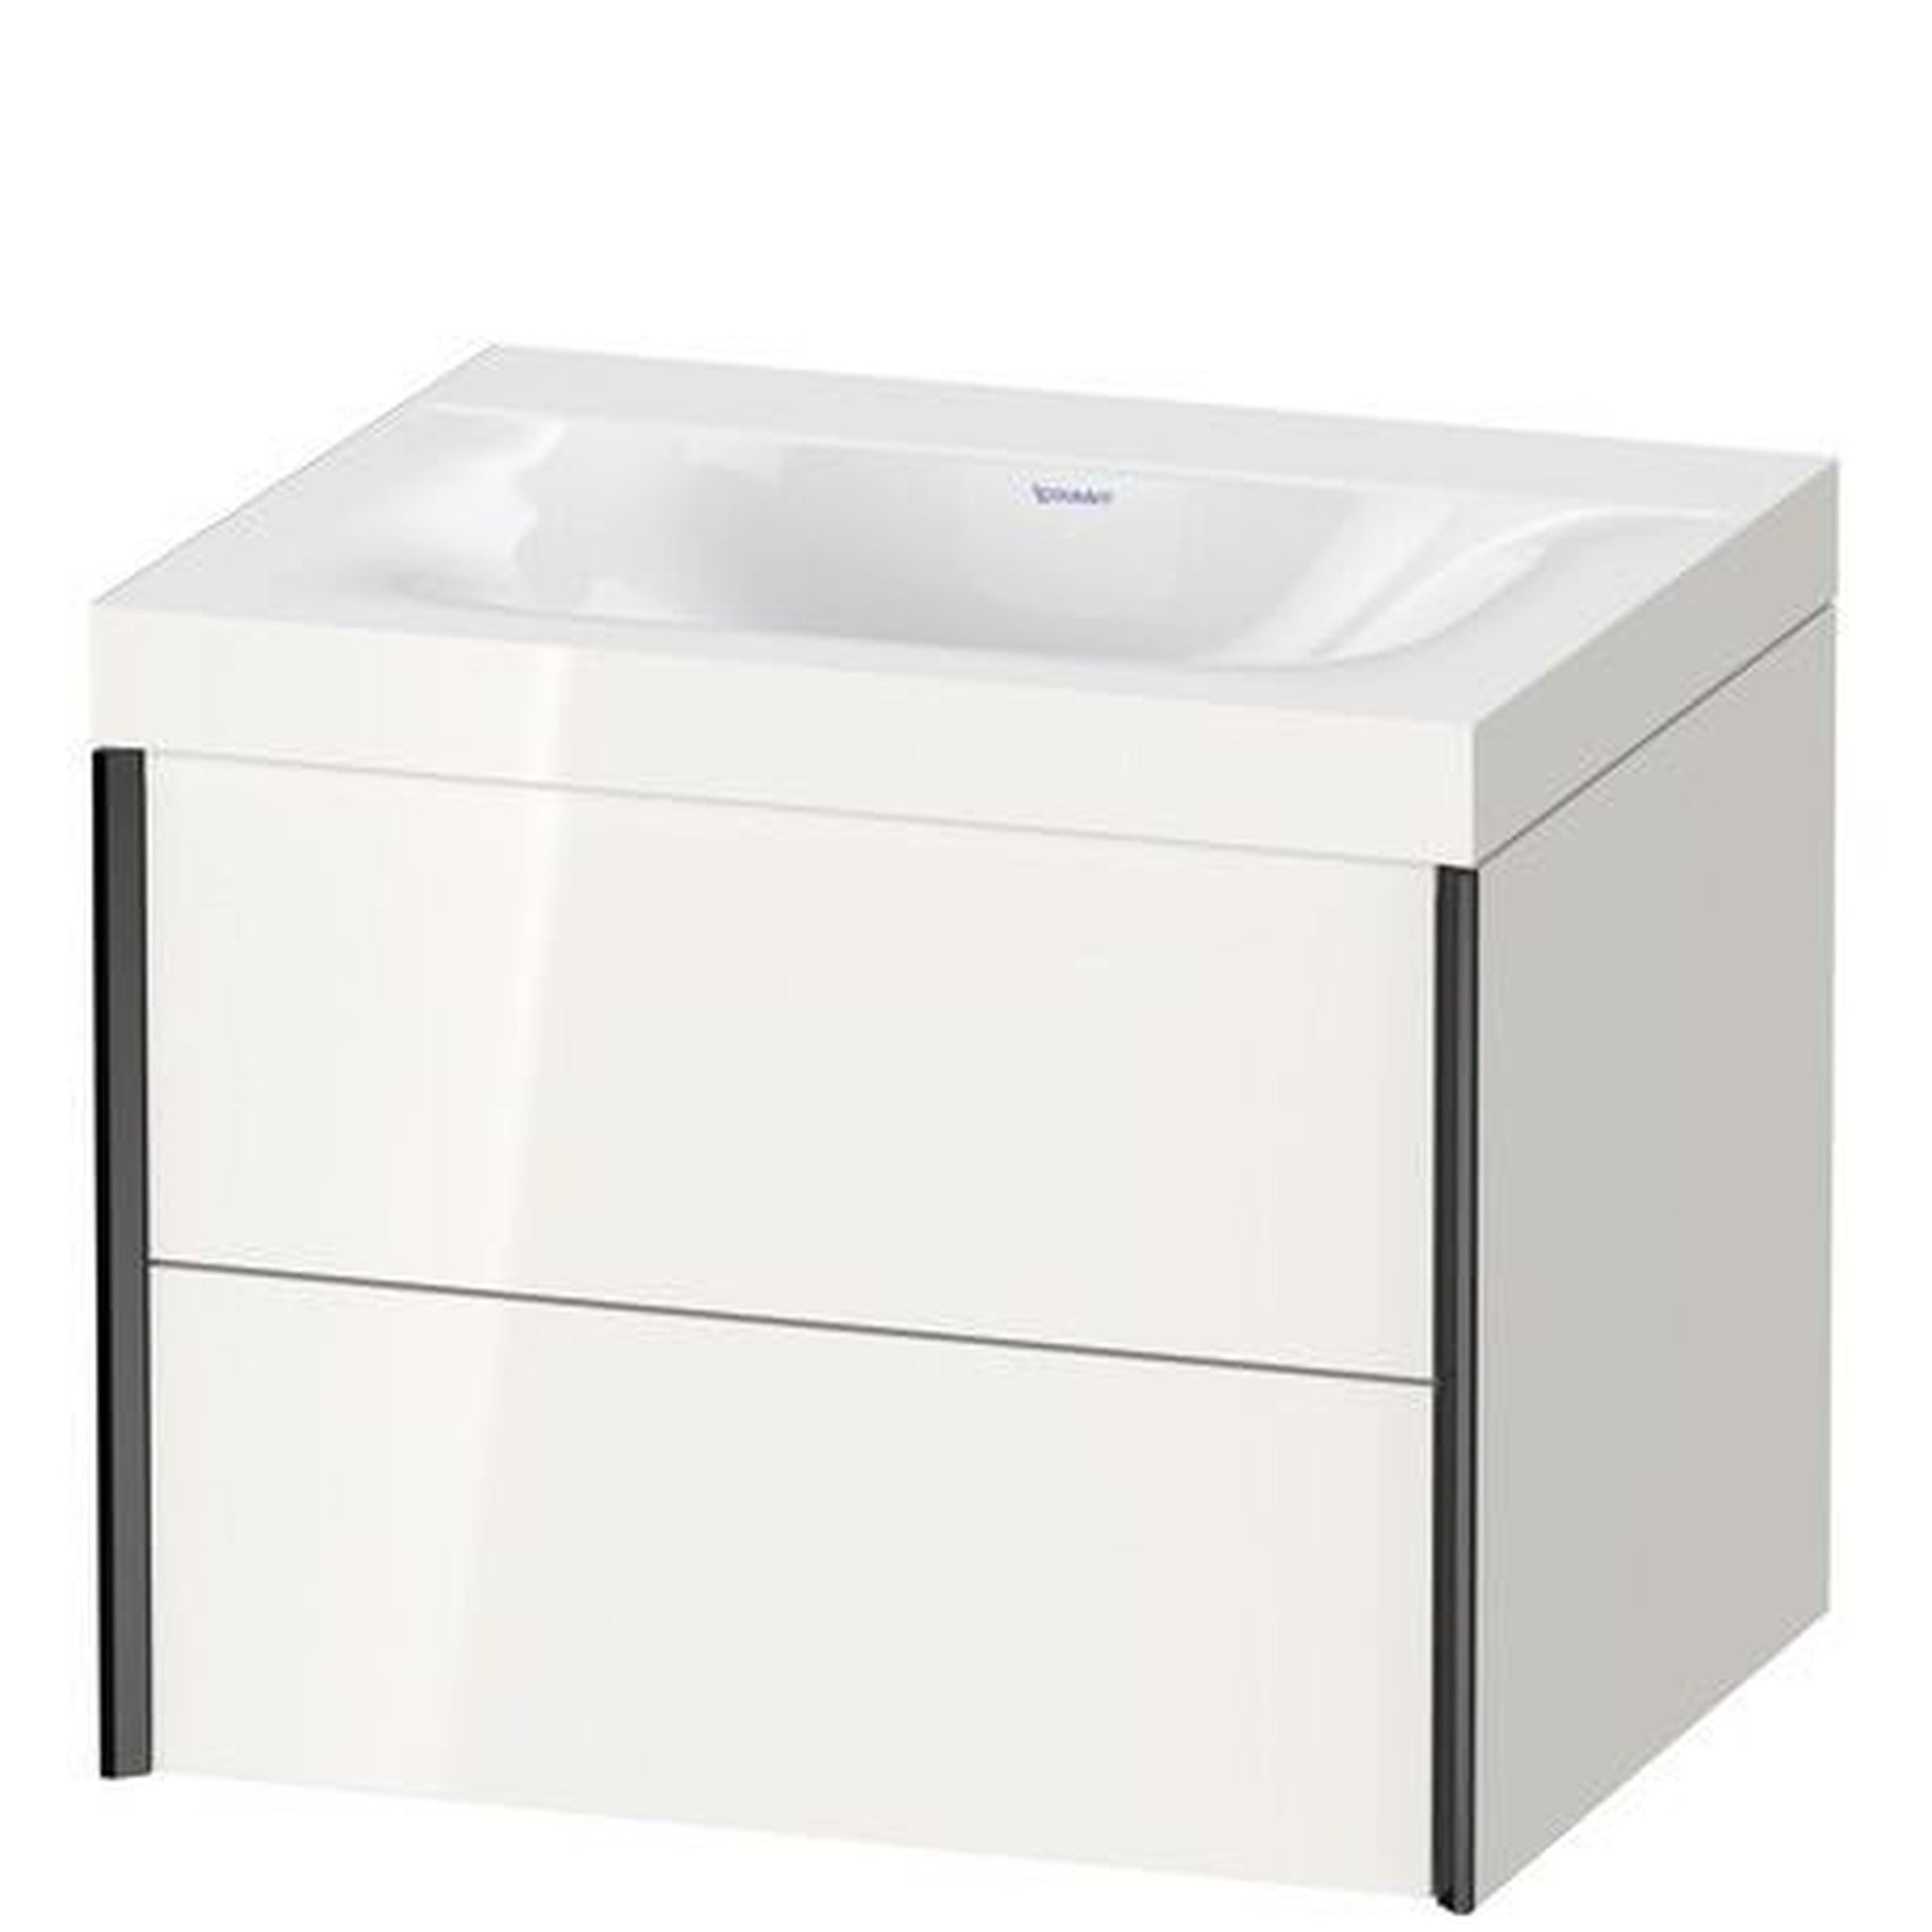 Duravit Xviu 24" x 20" x 19" Two Drawer C-Bonded Wall-Mount Vanity Kit Without Tap Hole, White (XV4614NB222C)